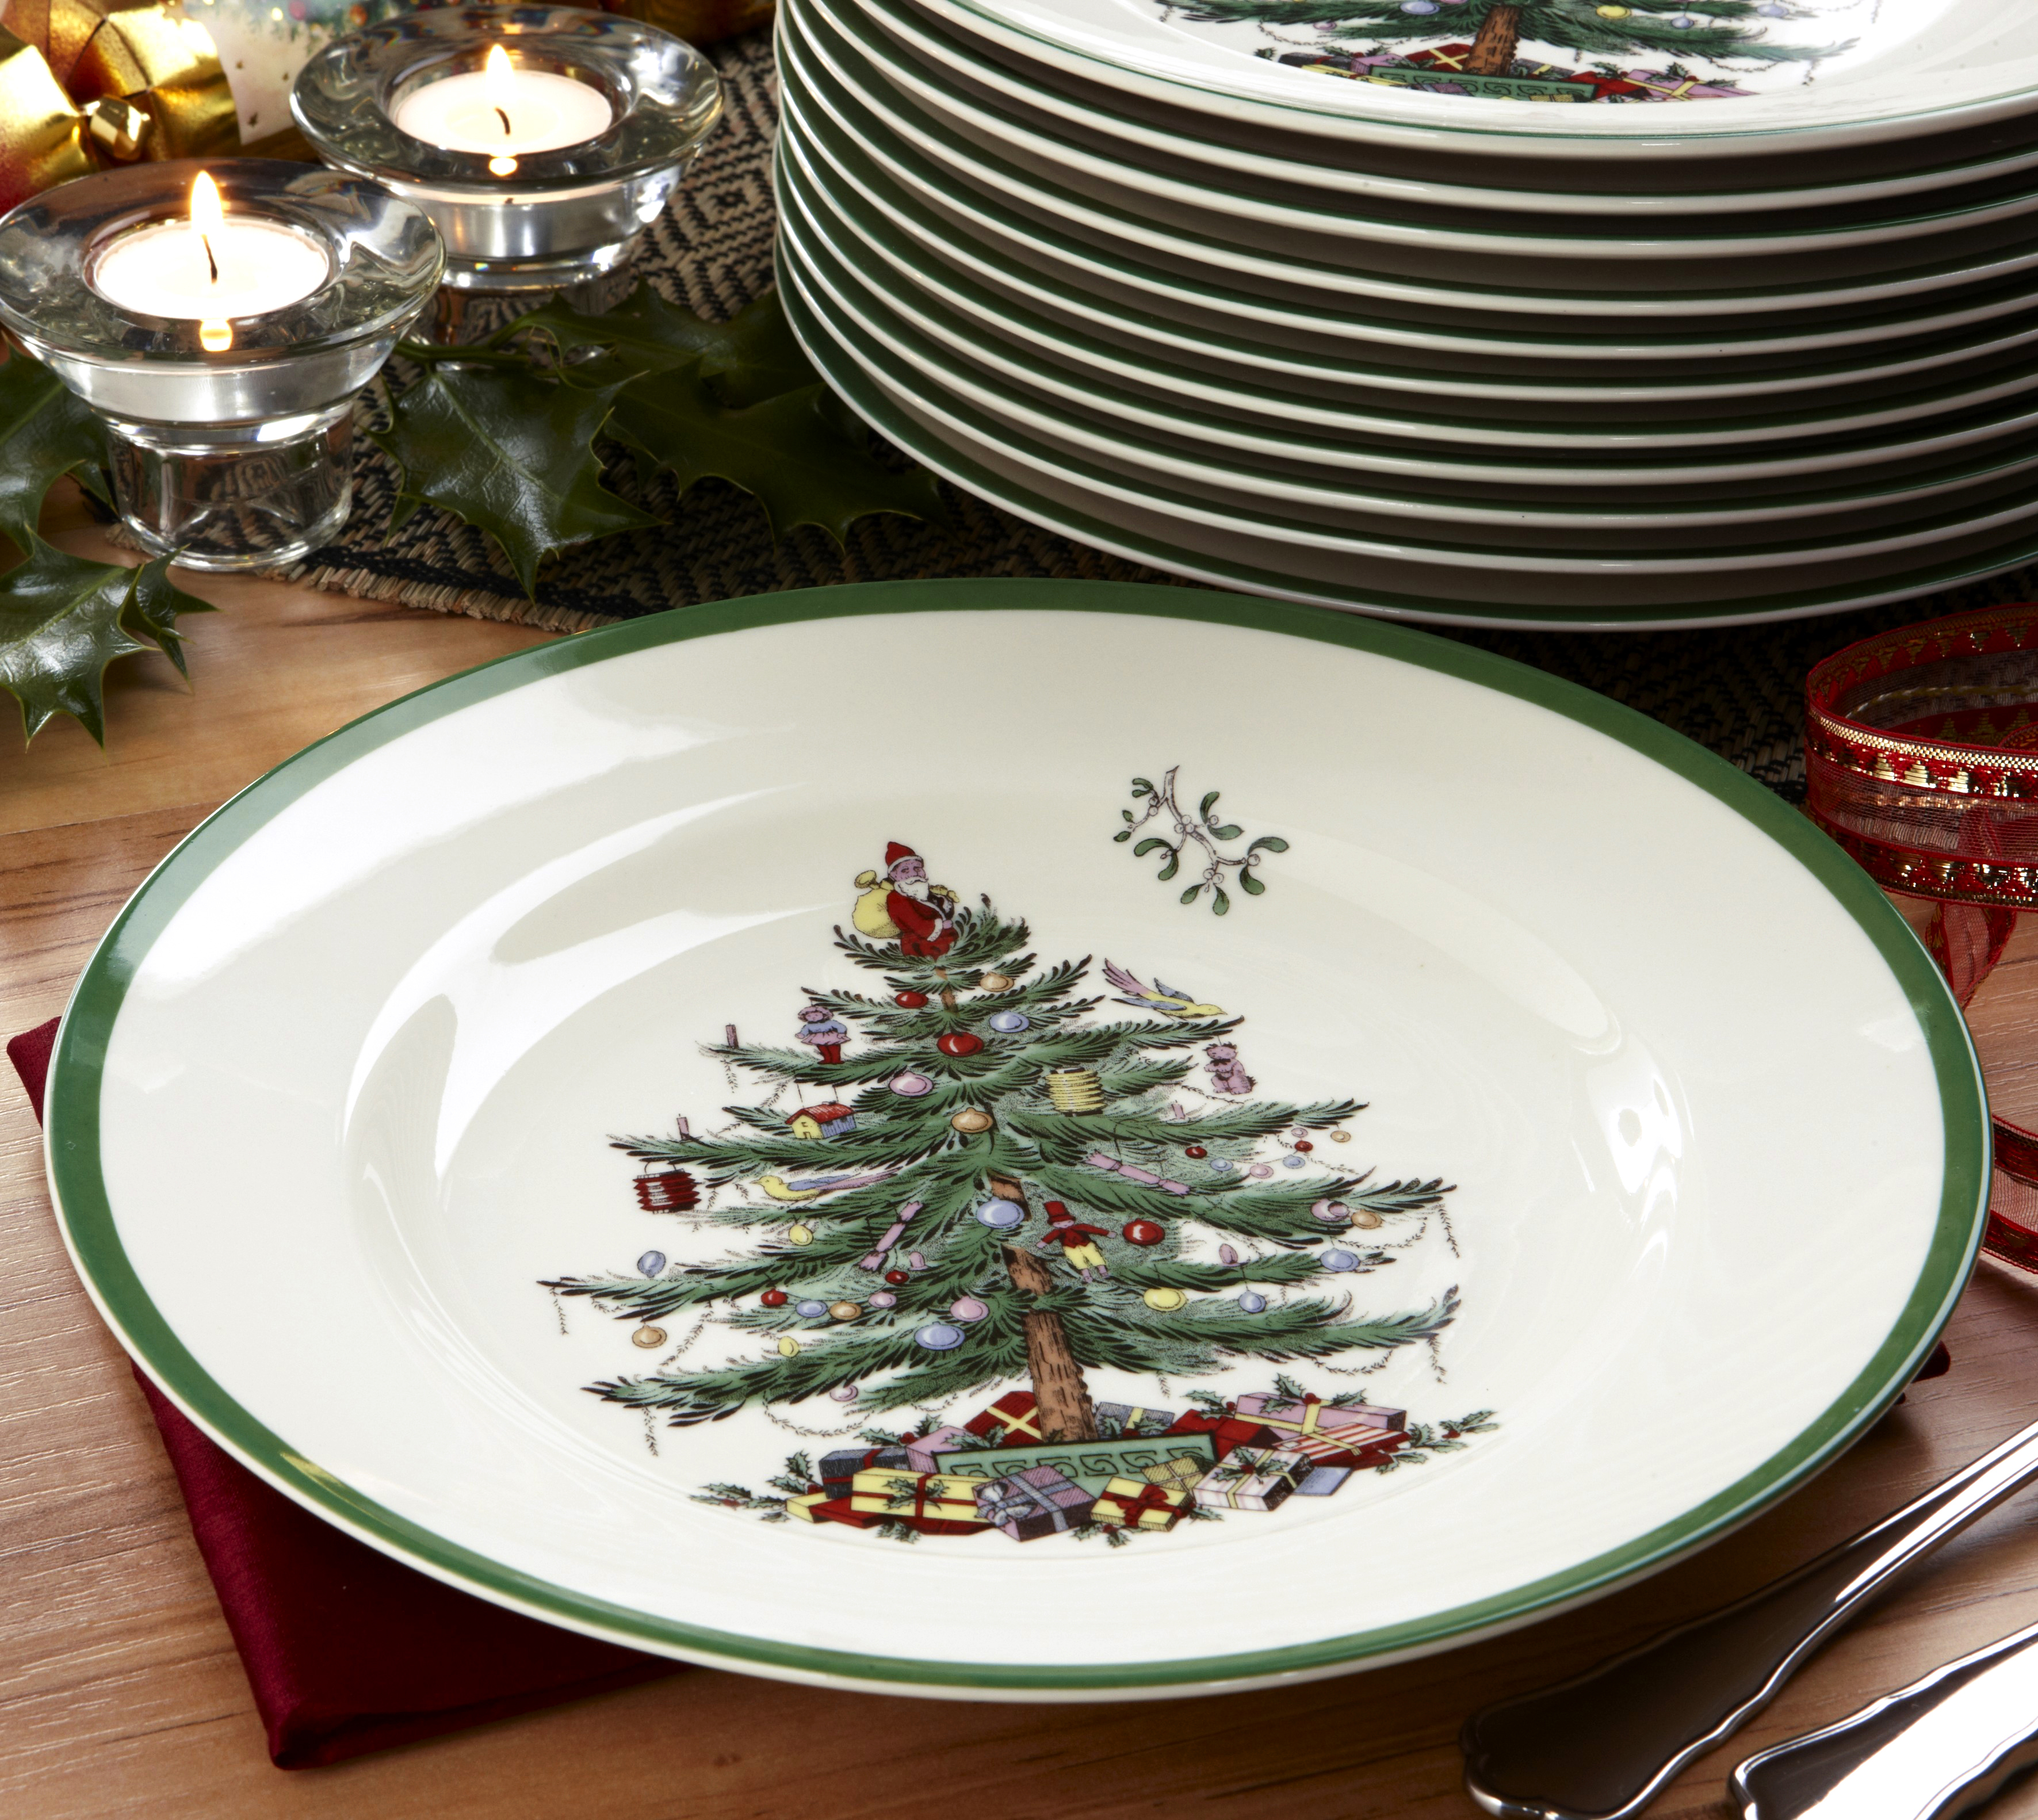 Spode Christmas Plates: Add Charm to Your Holiday Table Setting